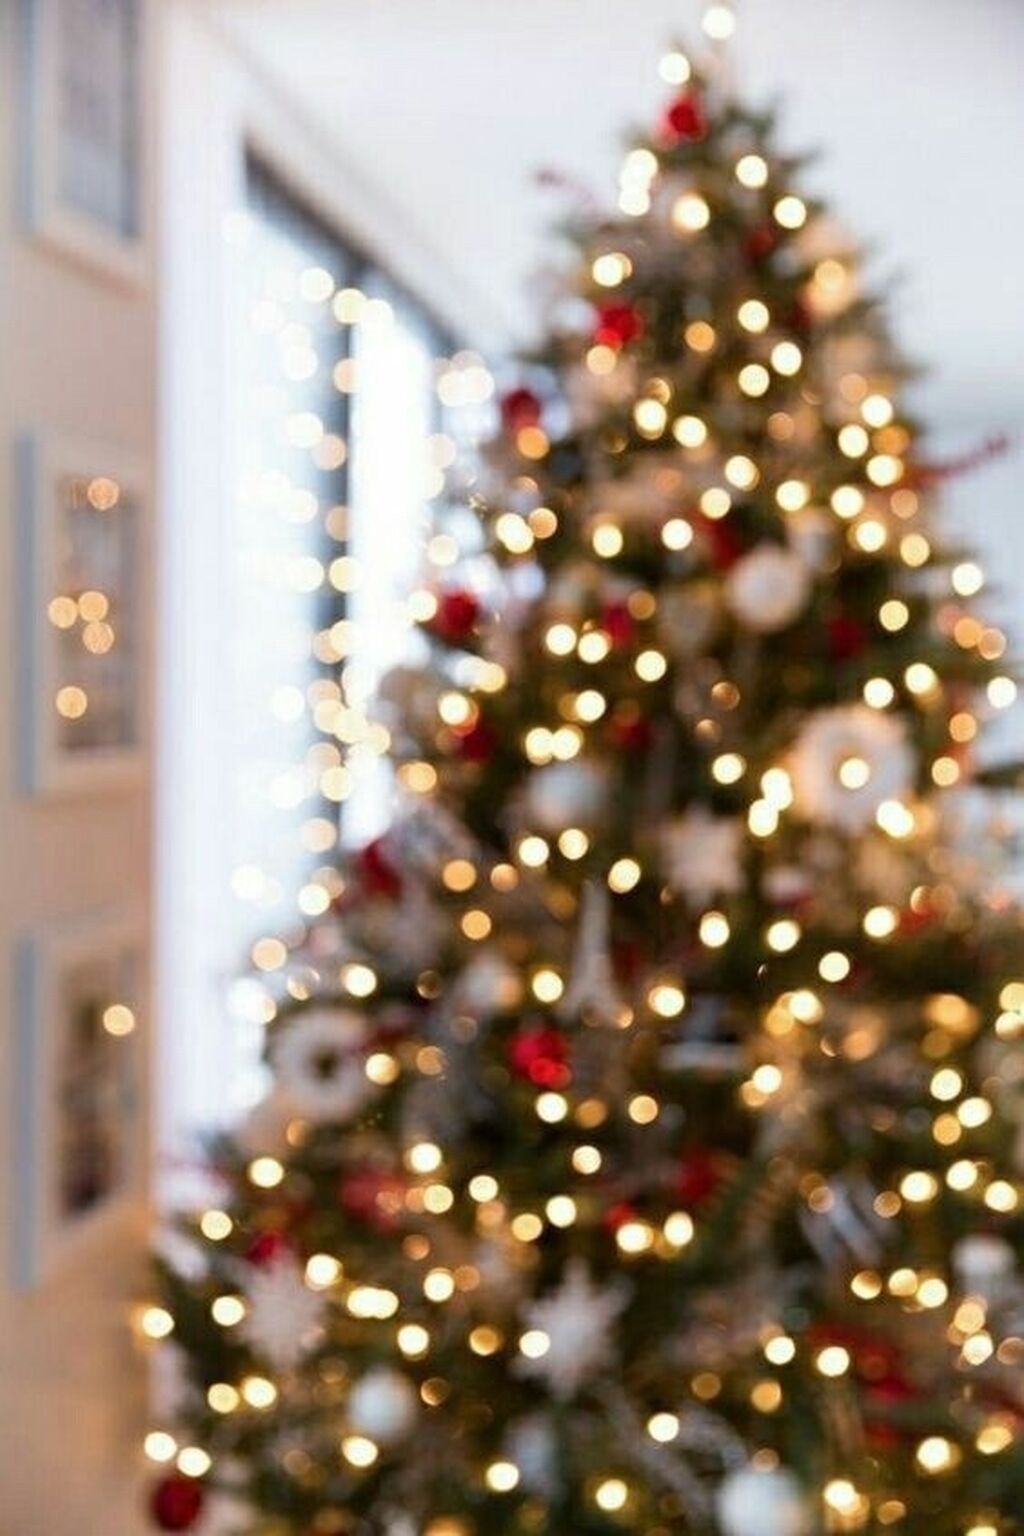 A blurry Christmas tree with white and red ornaments. - White Christmas